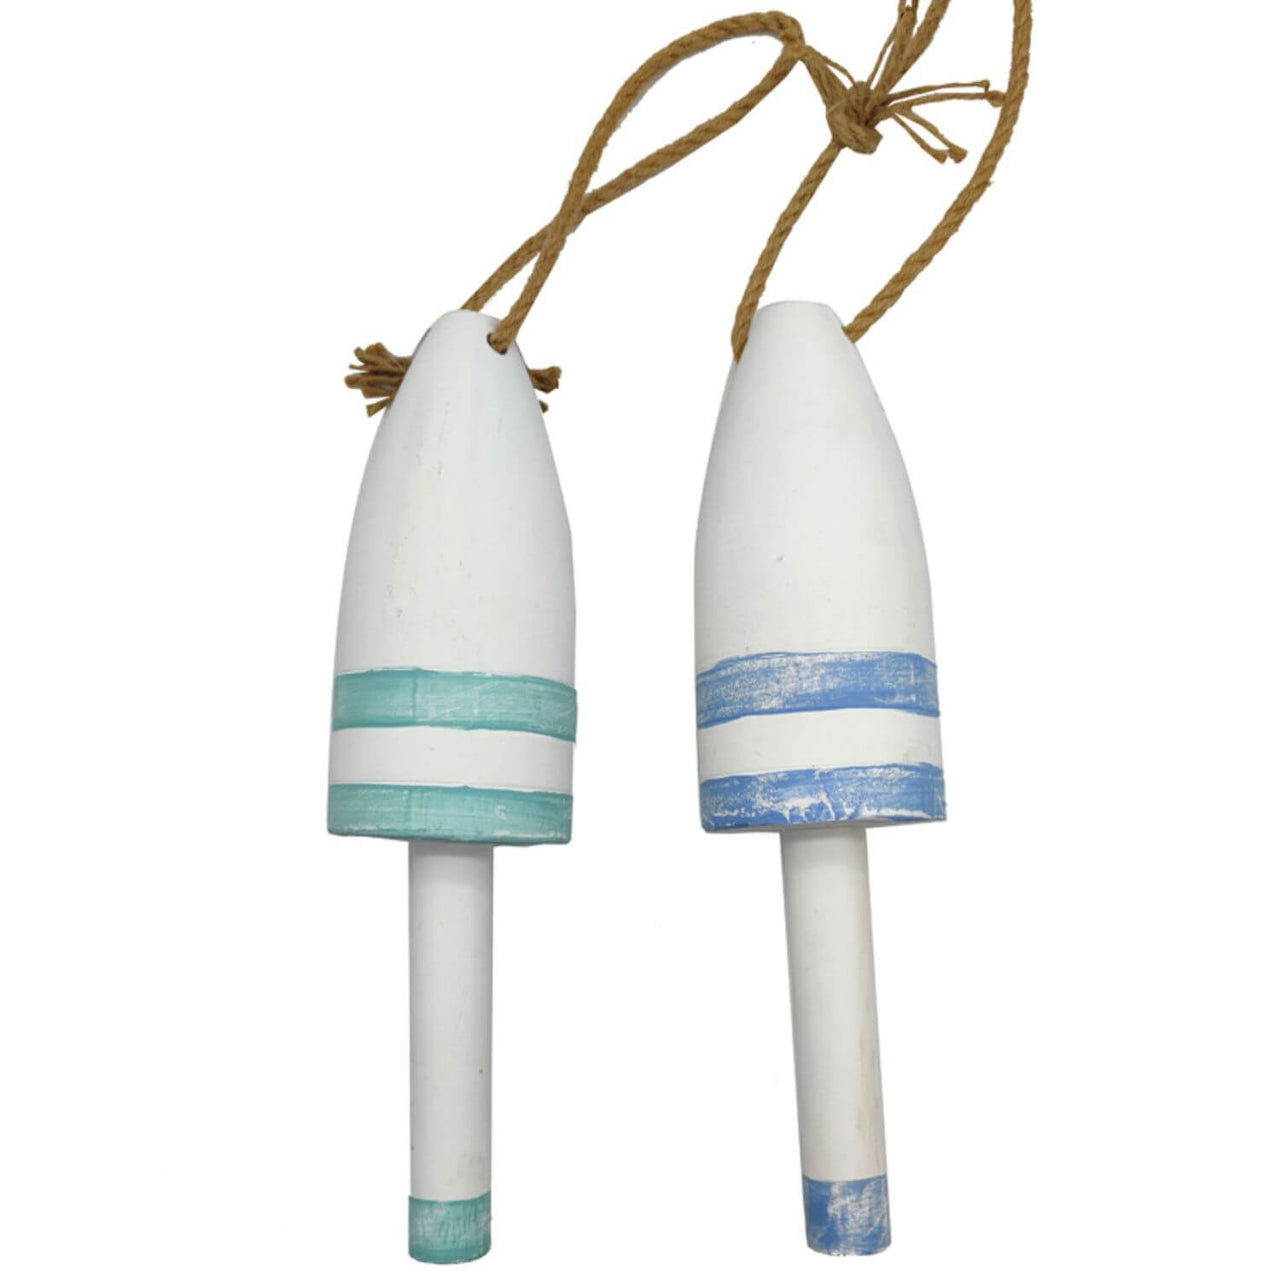 Distressed Wooden Buoys, Cool Blue and Sea Mist Green